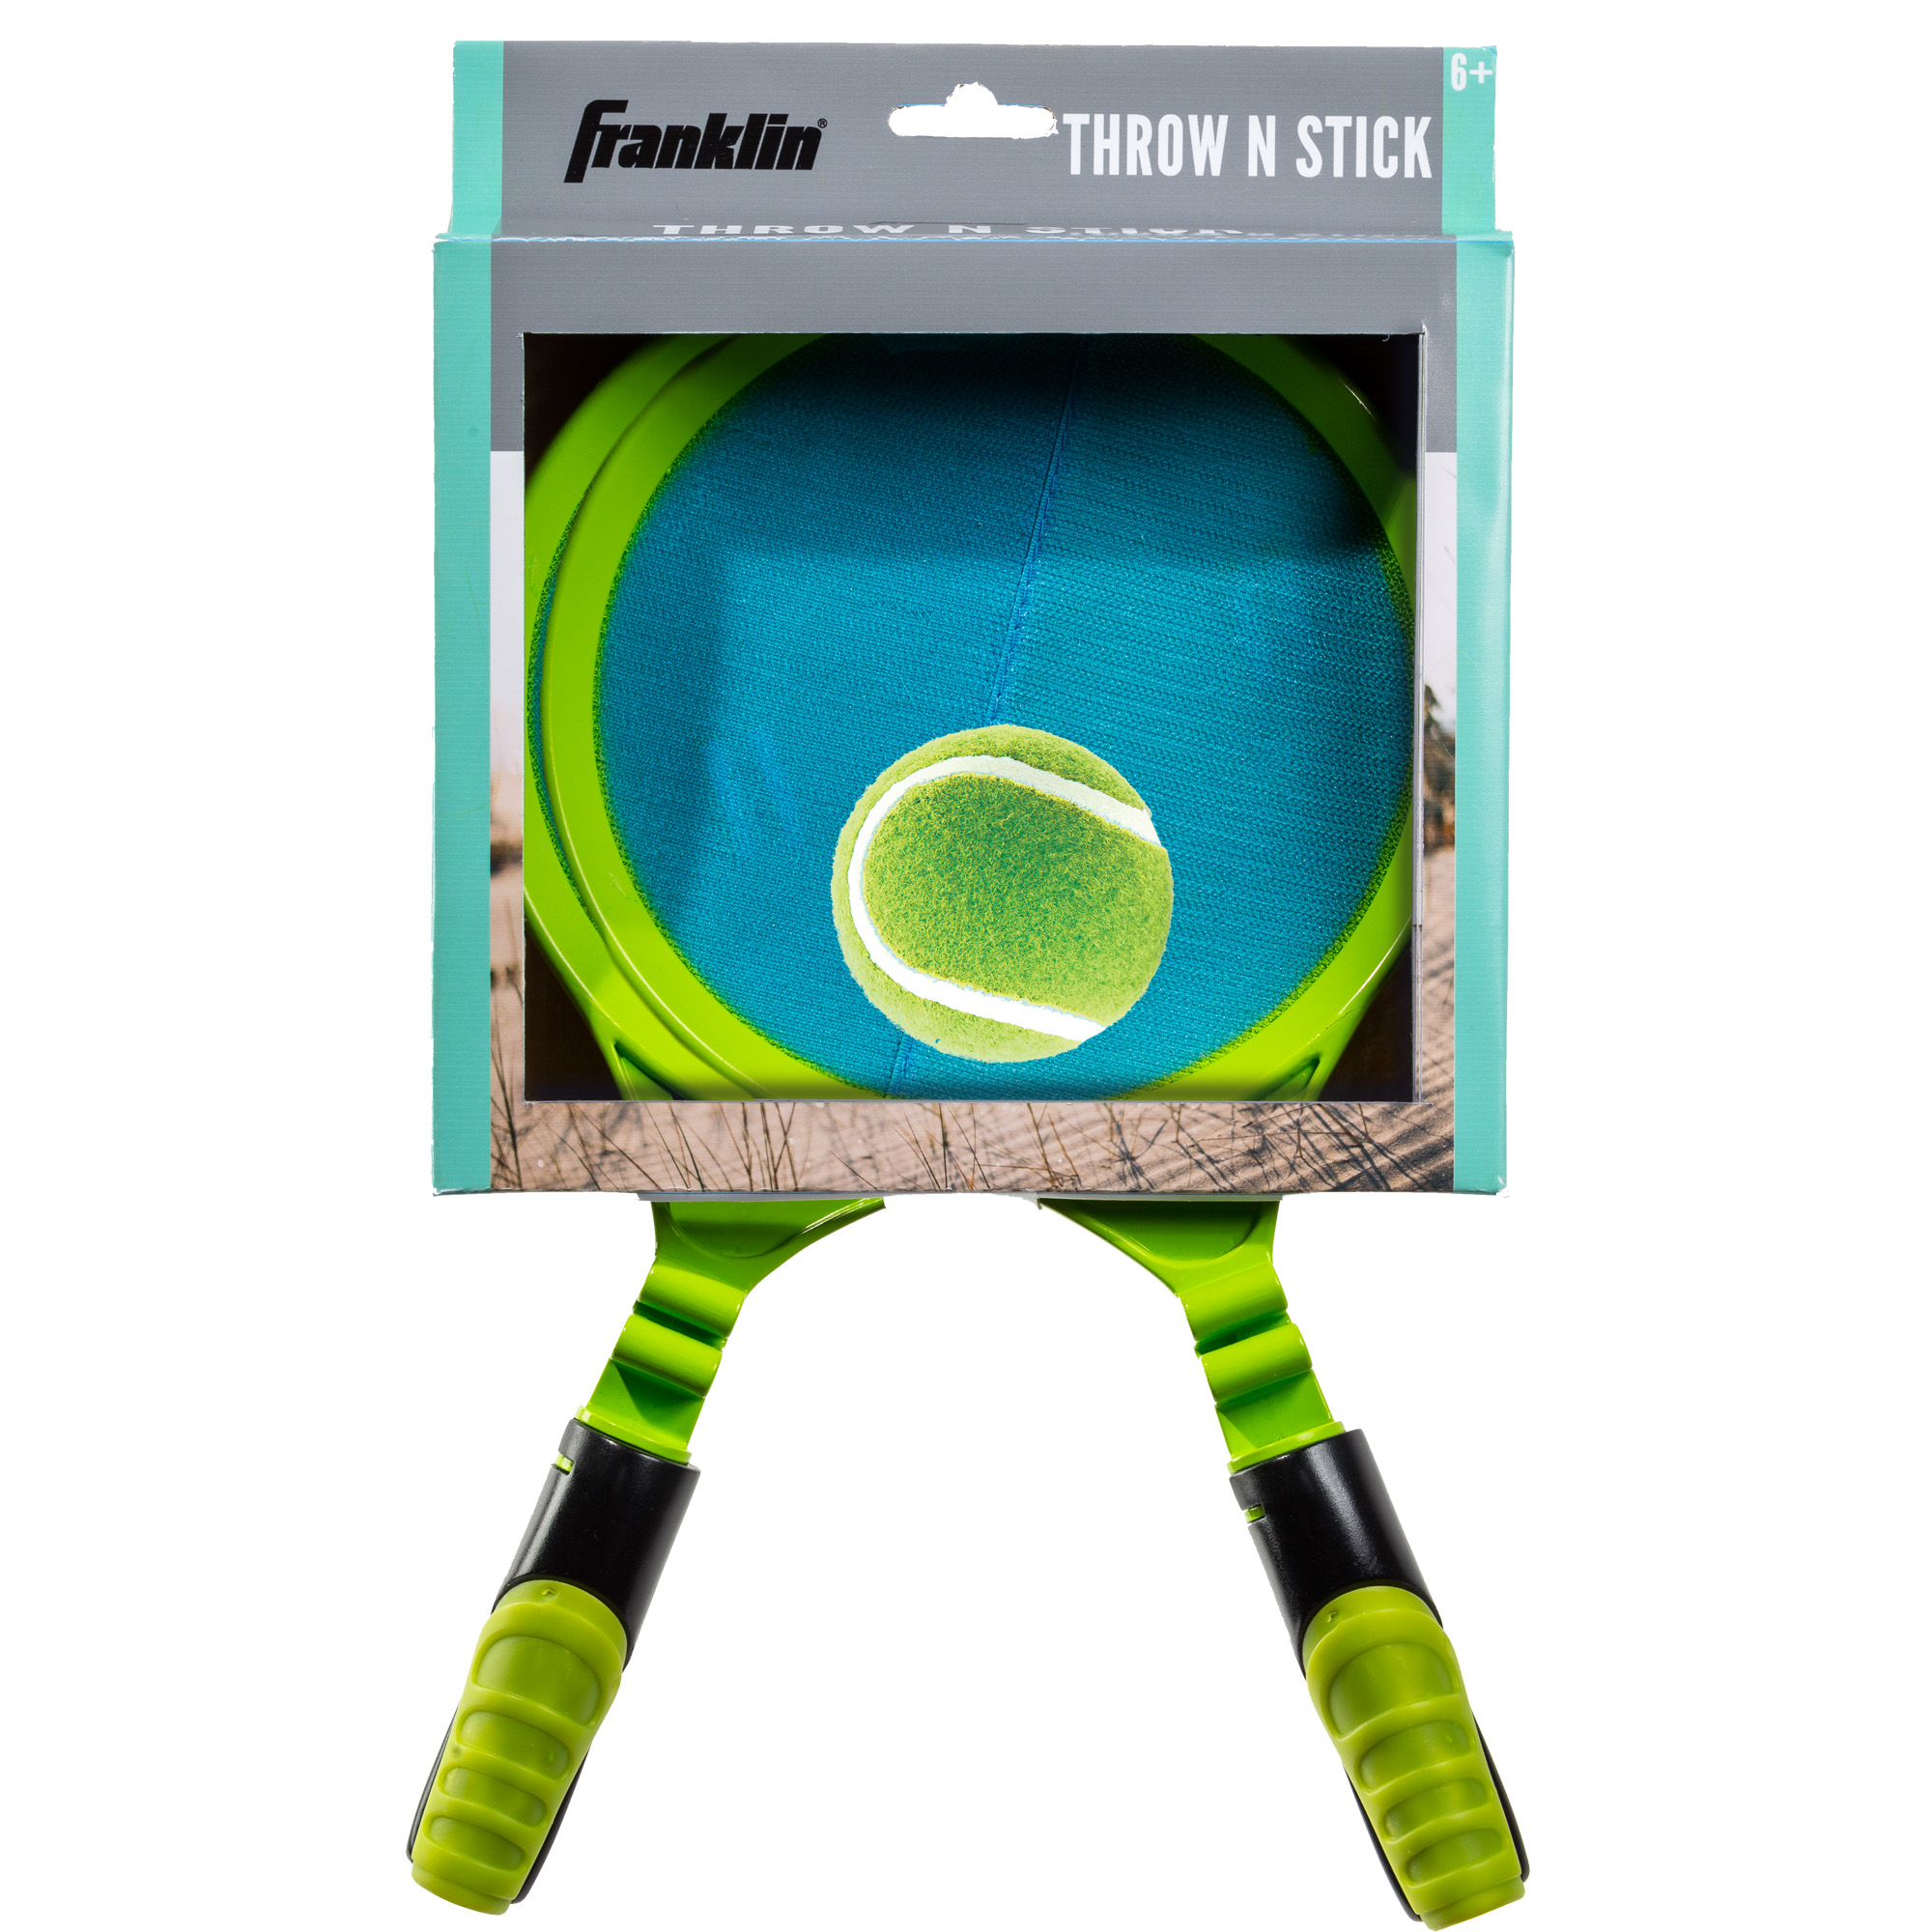 Franklin Sports Throw 'N Stick - image 1 of 2